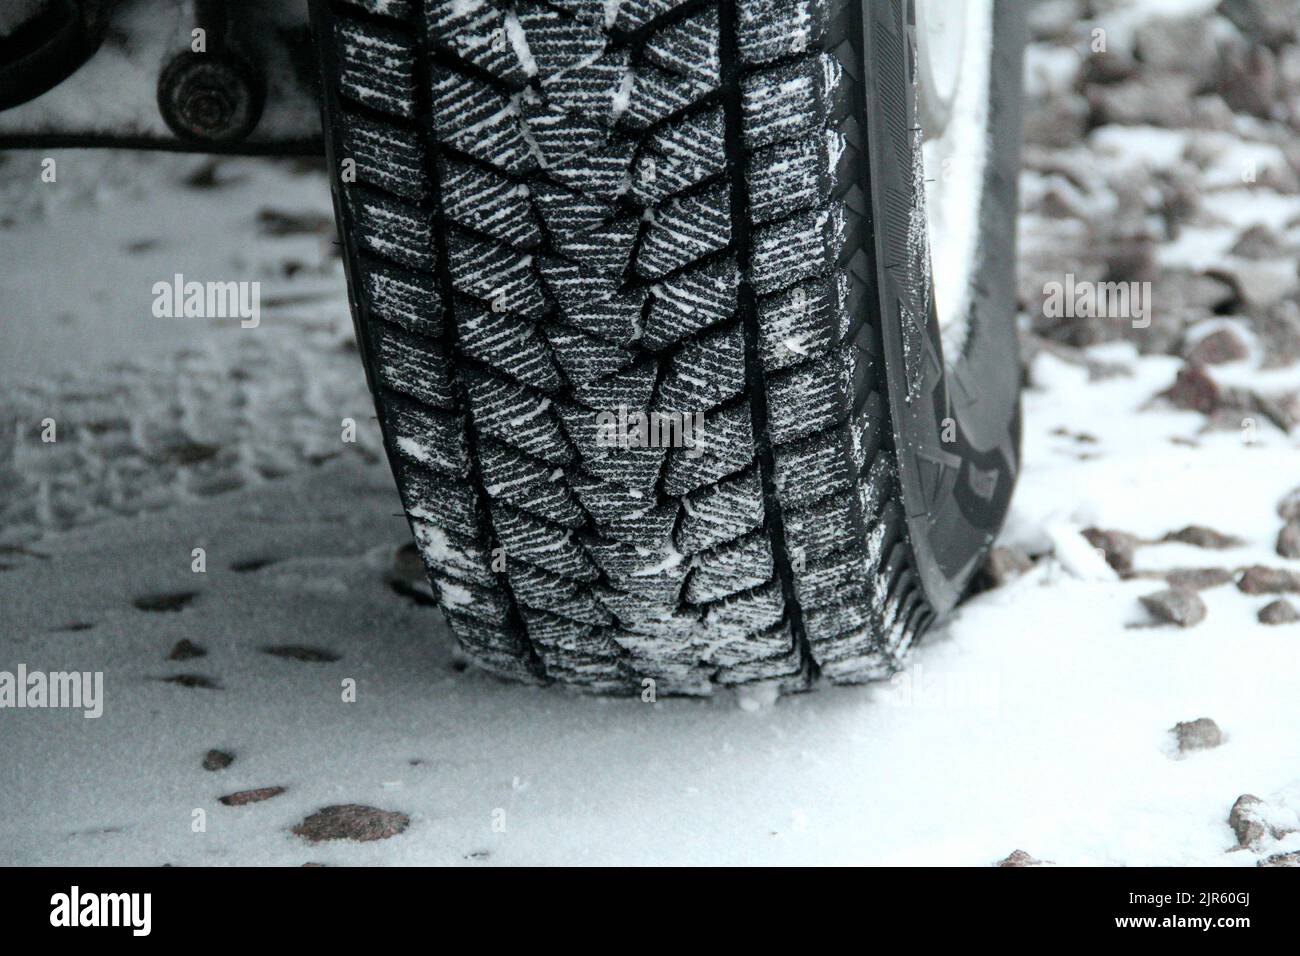 Snow on a winter tire tread blocks on a gravel road detailed Stock Photo